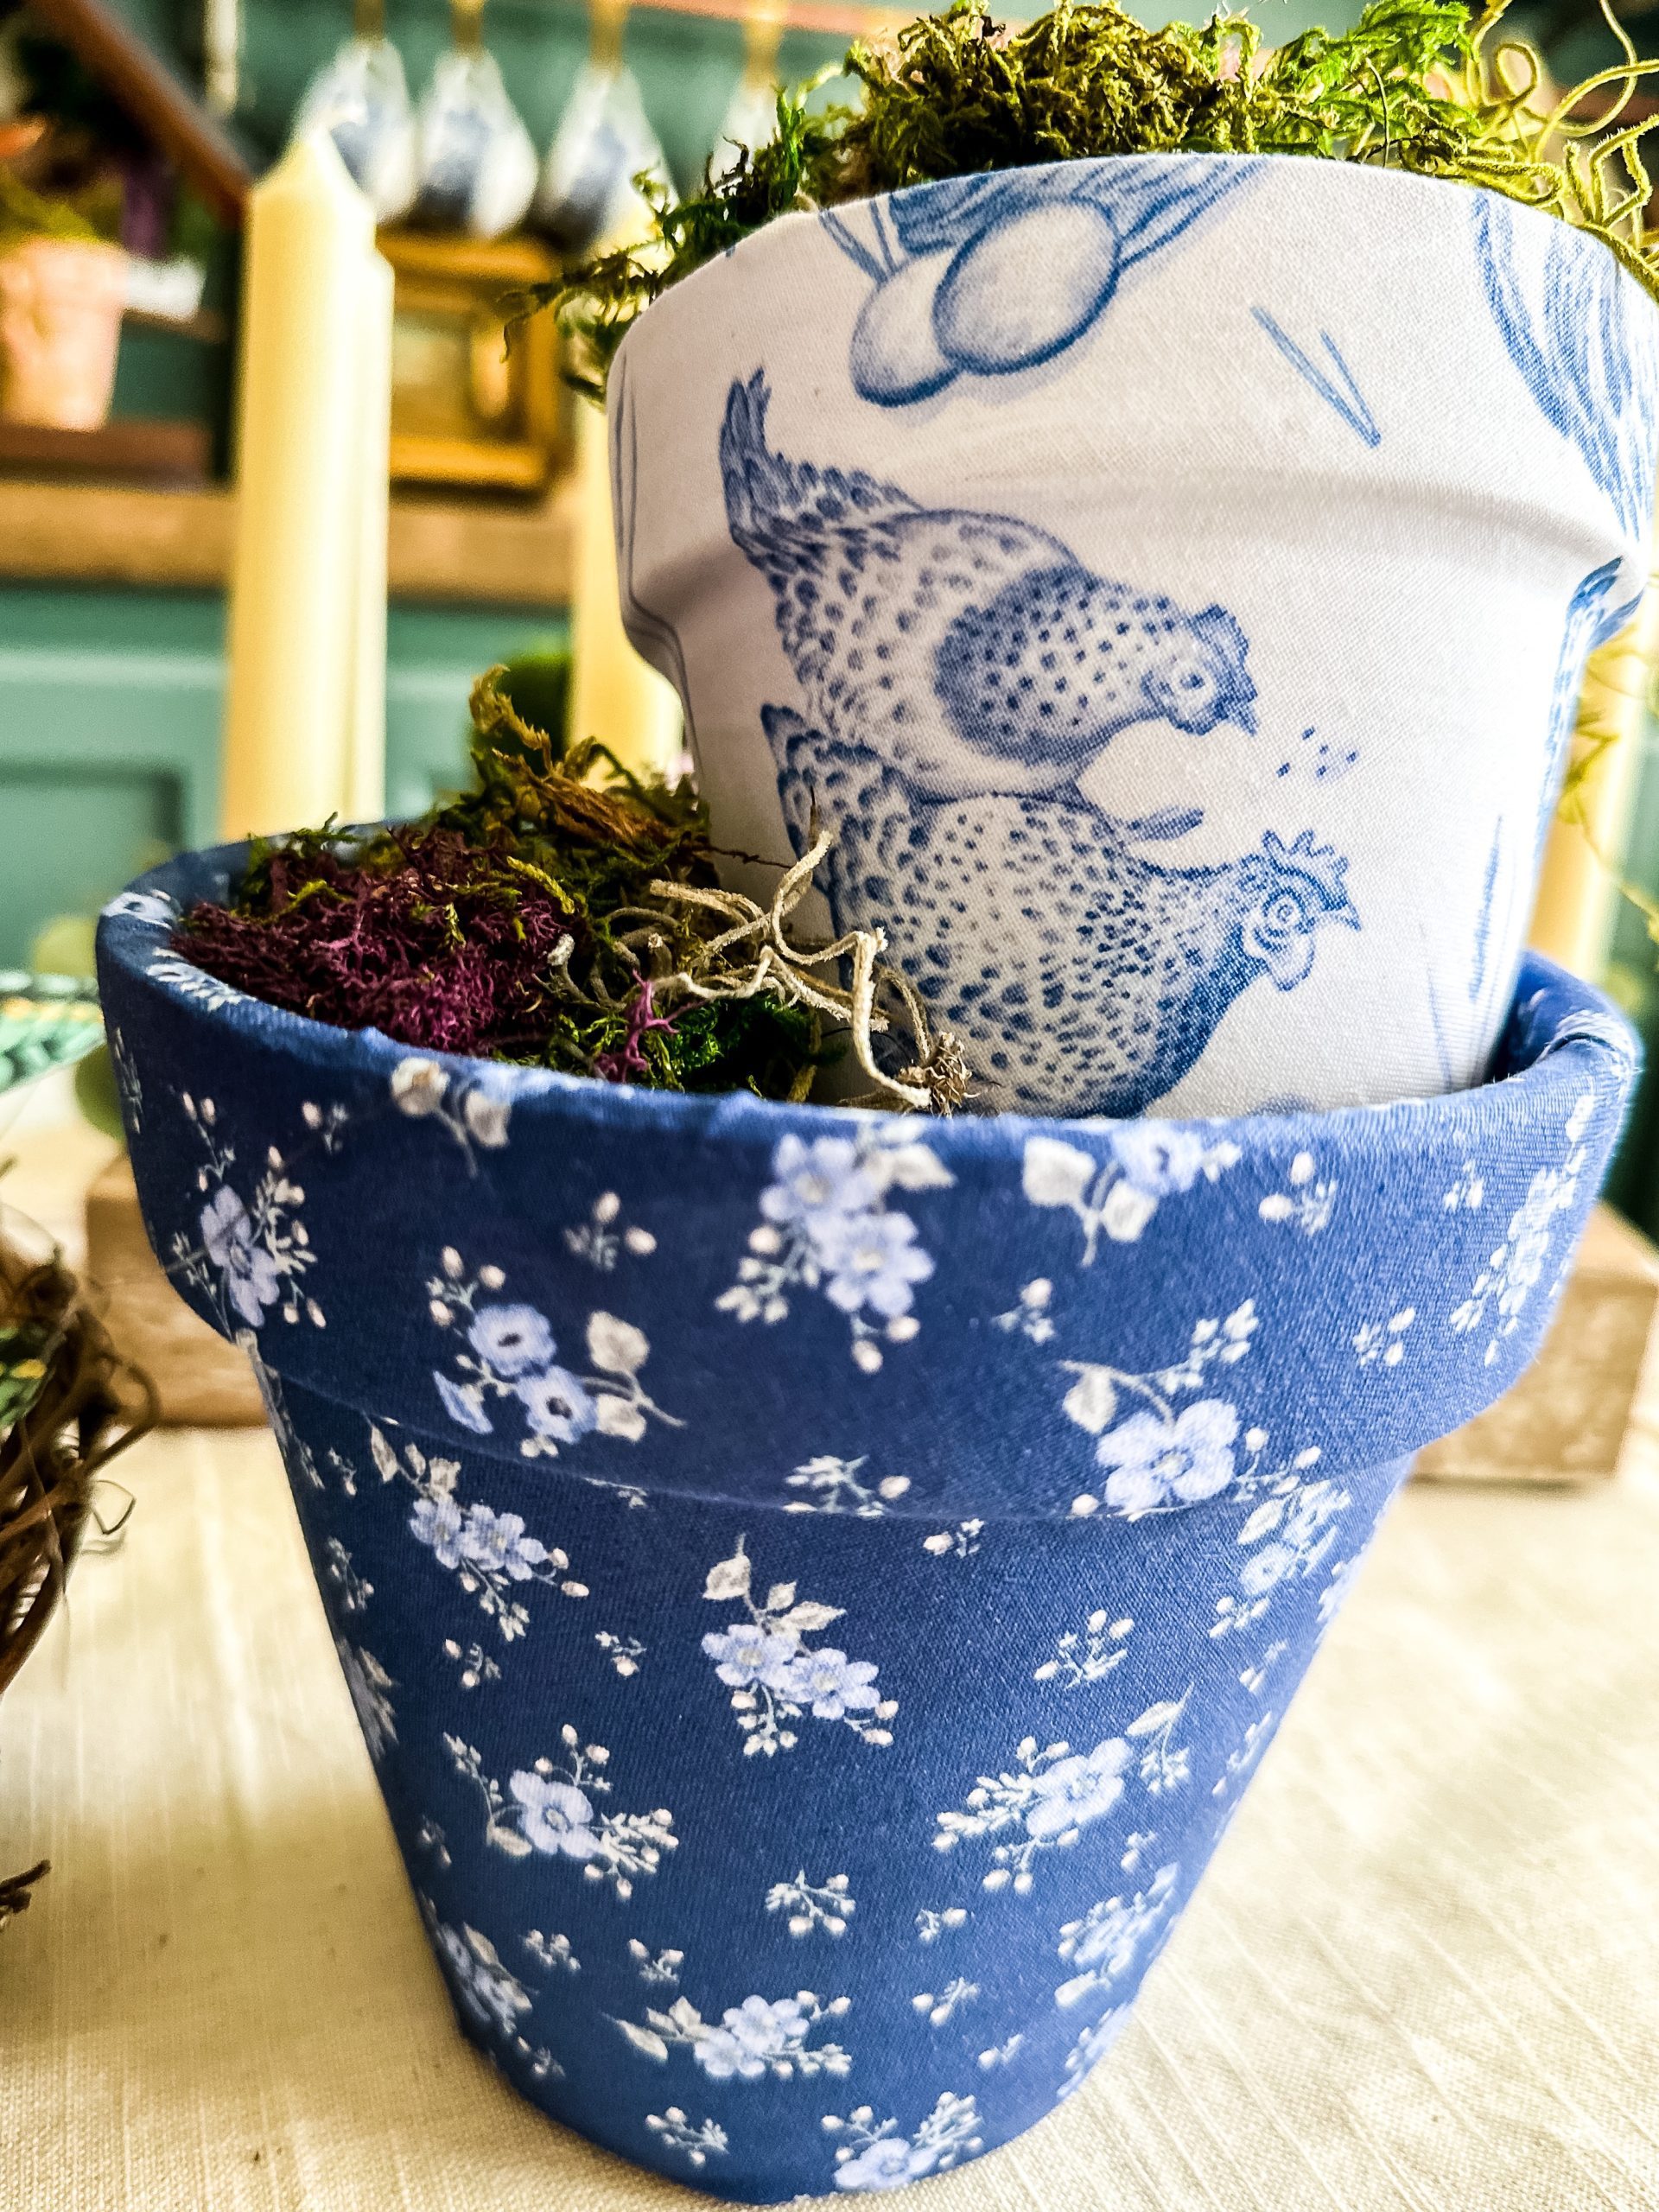 Fabric Covered Flower Pots for the Garden